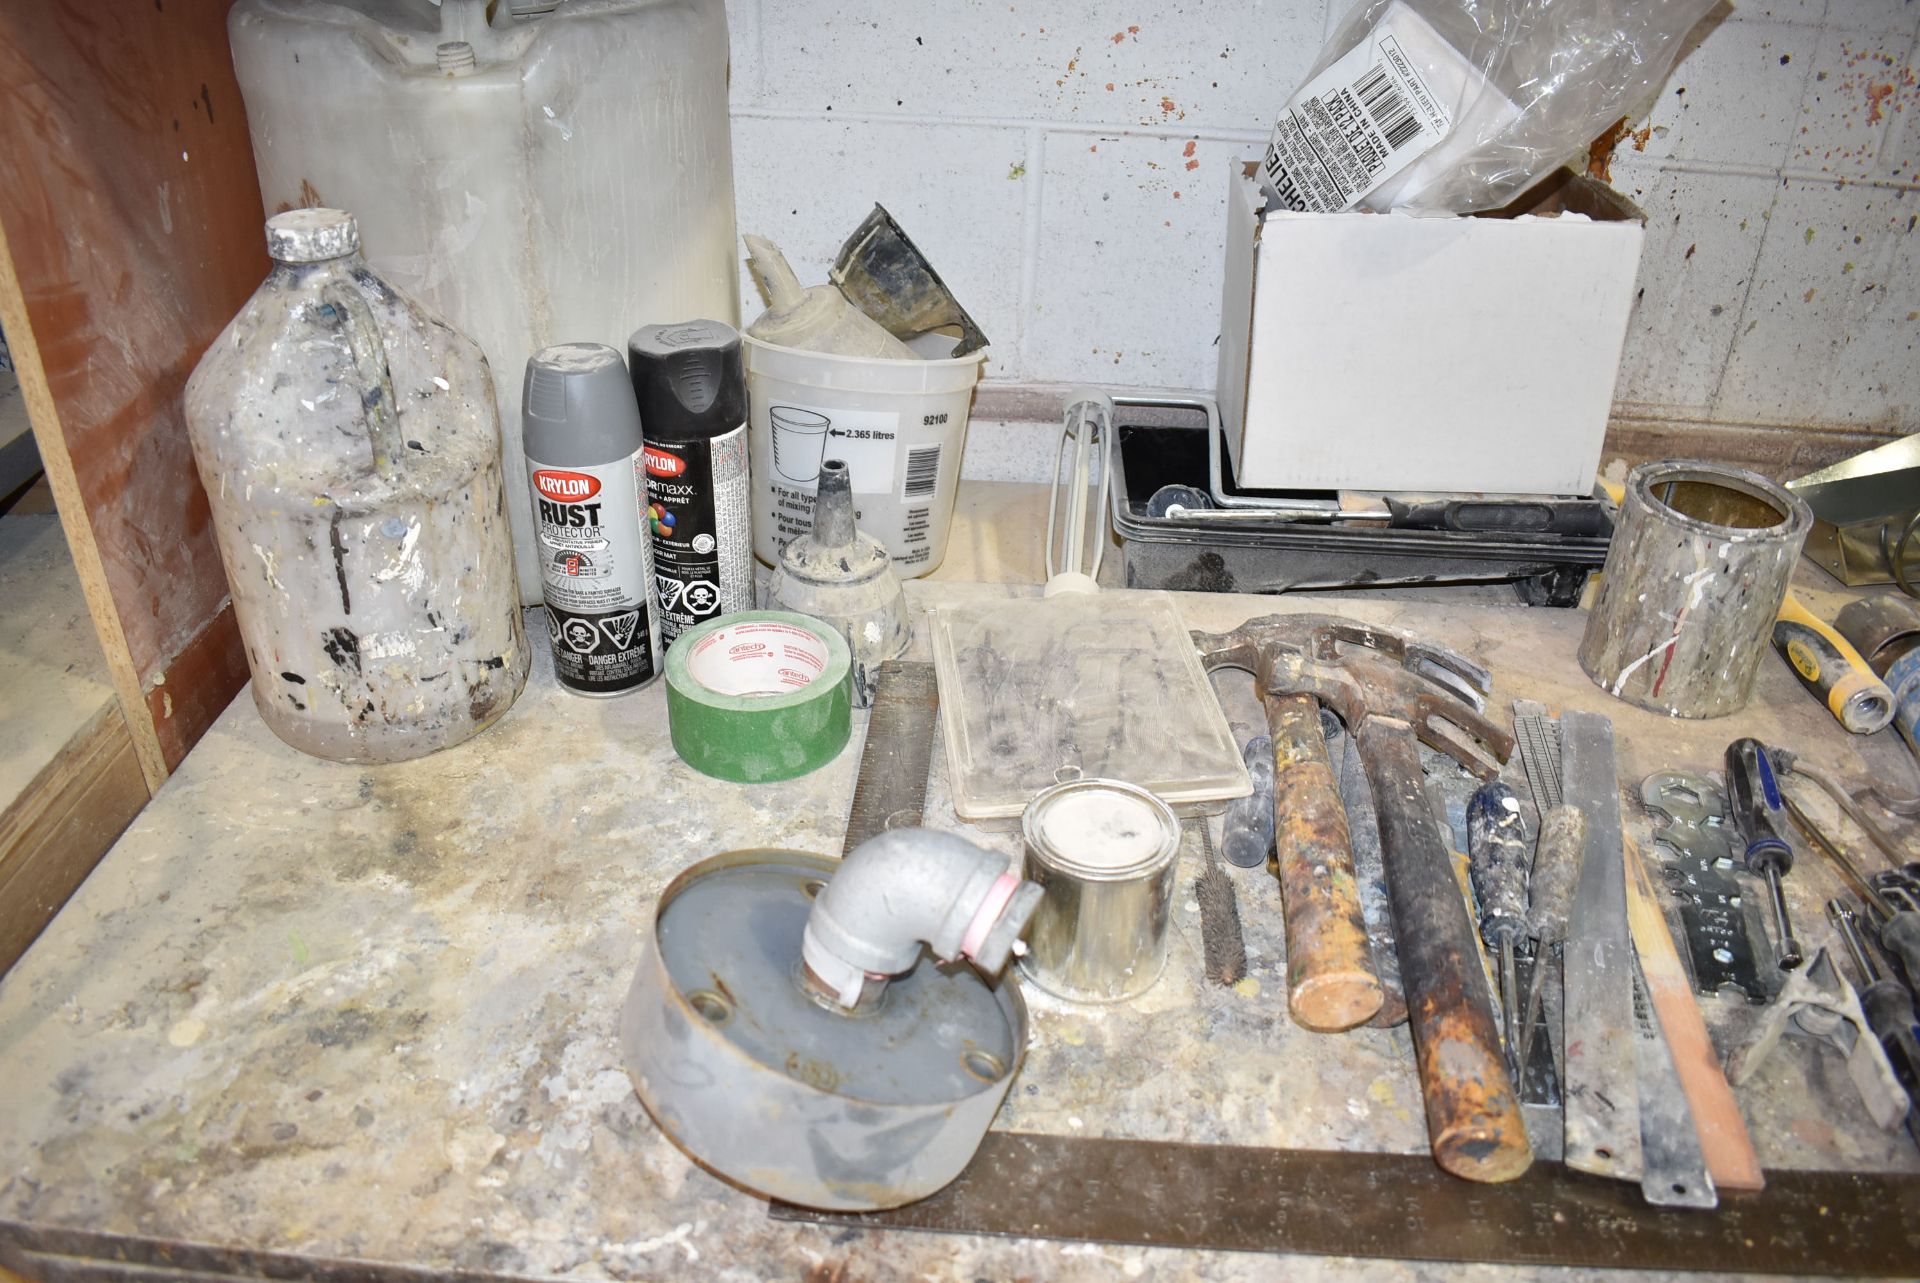 LOT/ WORKBENCH WITH CONTENTS CONSISTING OF PAINT MIXERS, PNEUMATIC SPRAY GUNS, HARDWARE AND SUPPLIES - Image 3 of 5